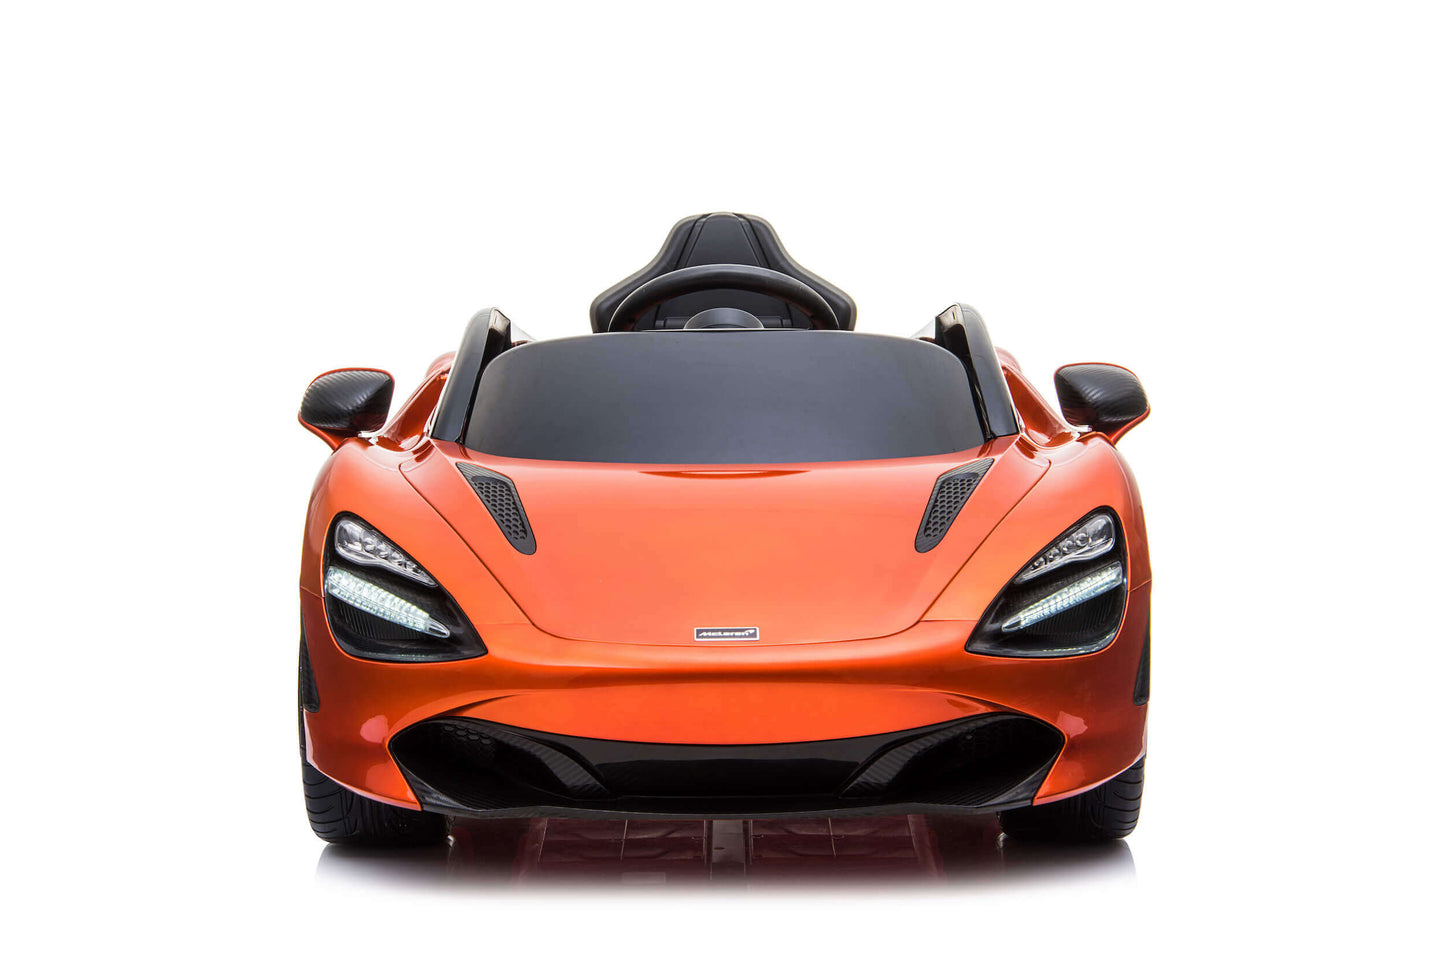 Front view of a red, battery-operated McLaren electric ride-on for children on a white background.